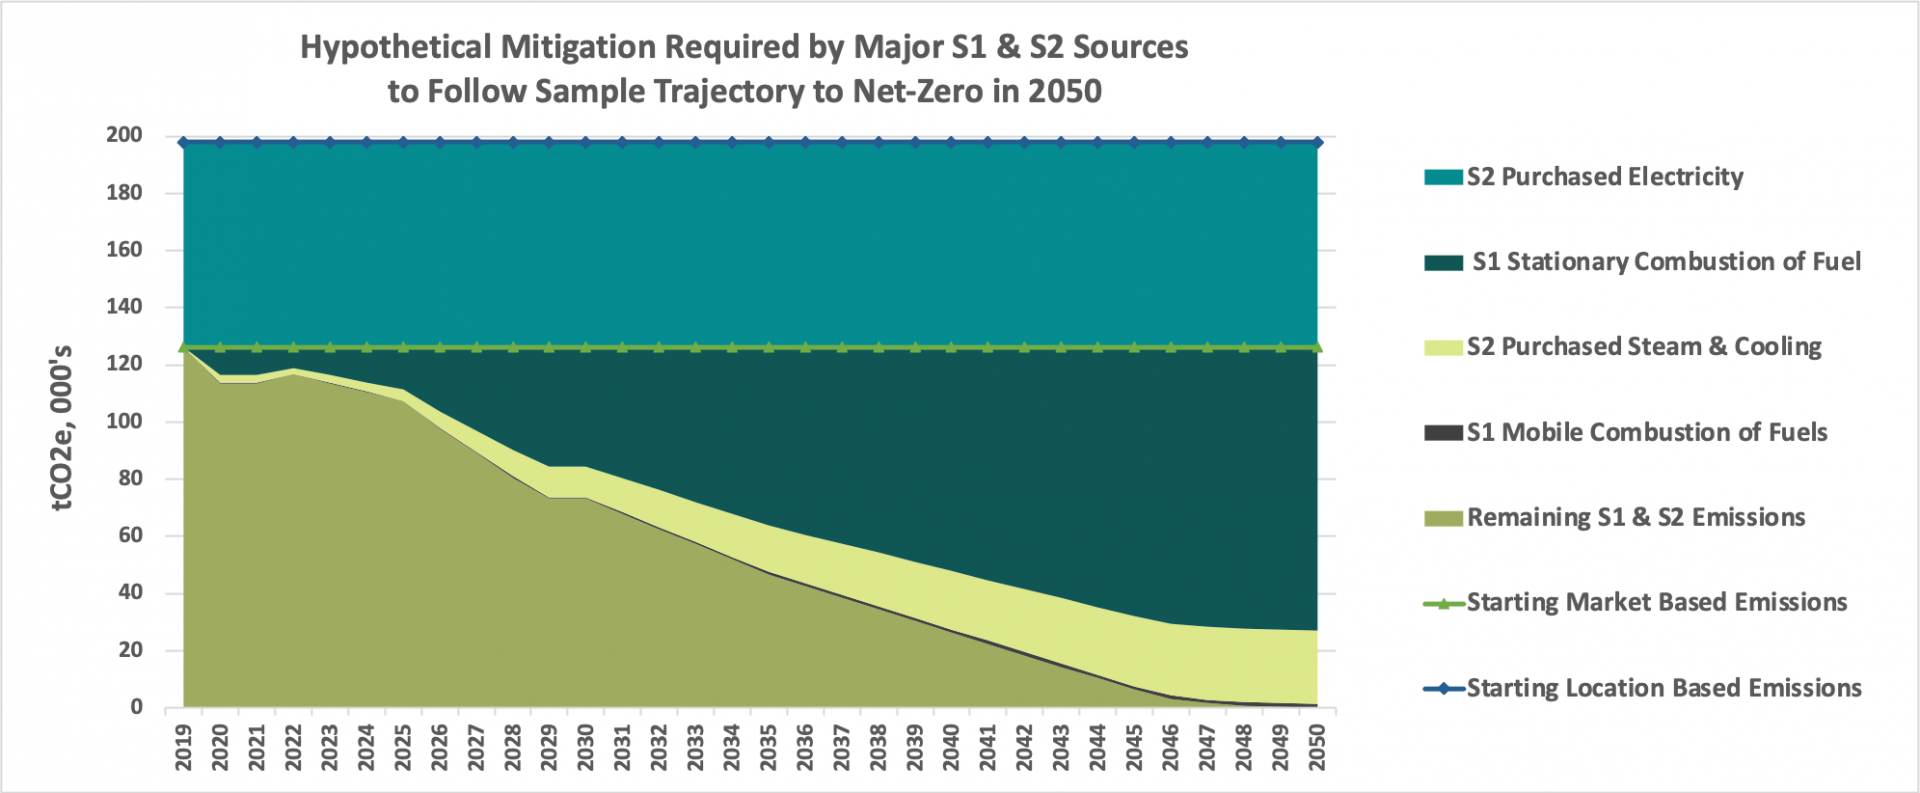 Image Description: Hypothetical Mitigation Required by Major Reported S1 and S2 Sources to Each Follow the Sample Trajectory to Net Zero in 2050